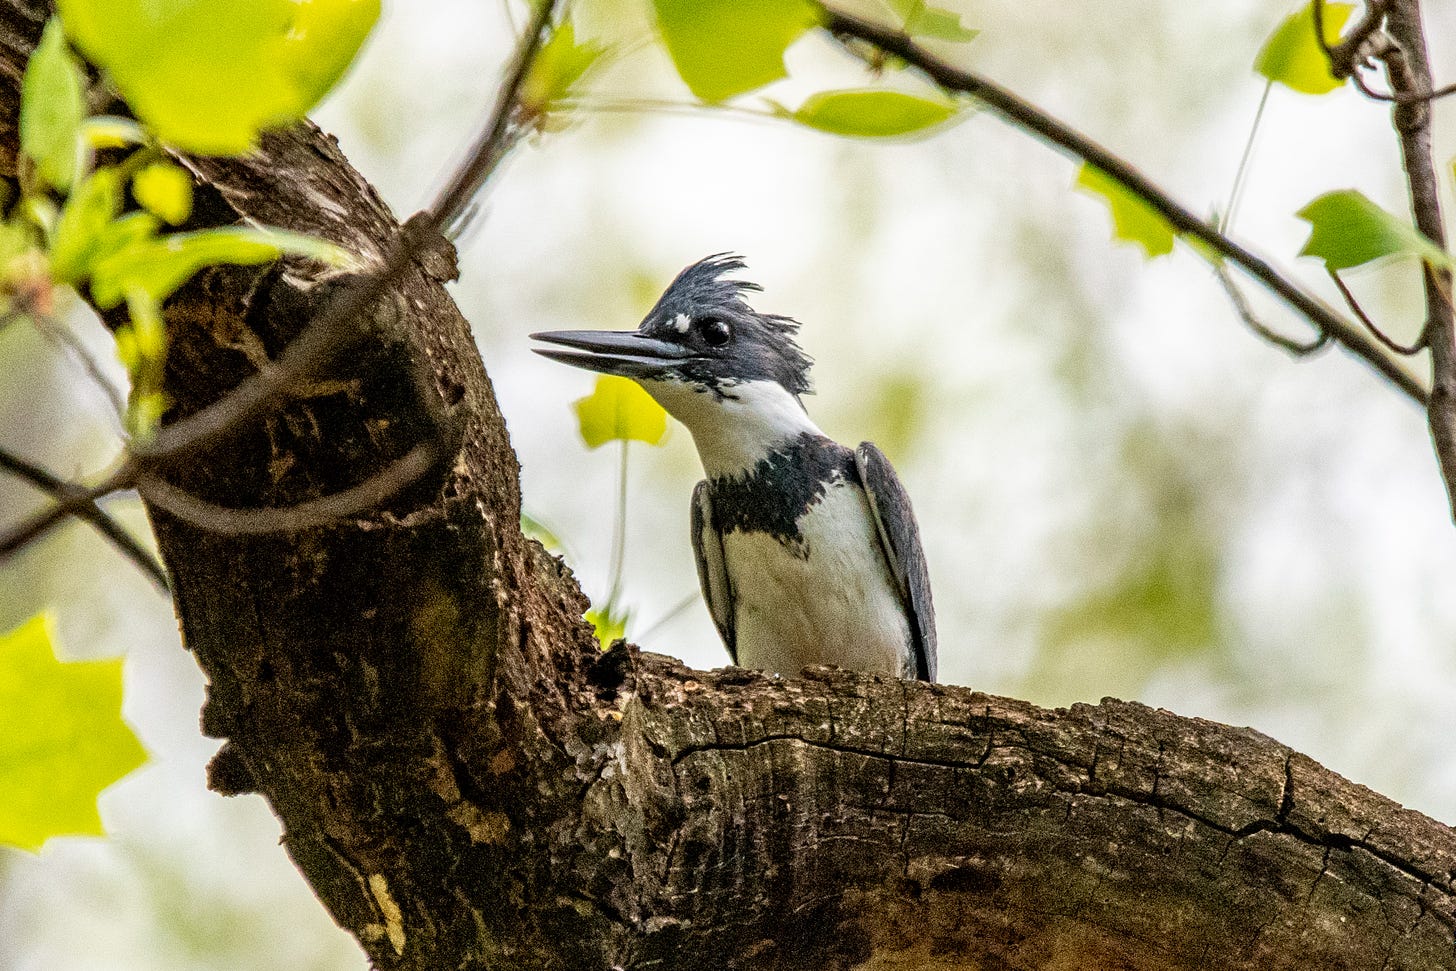 A male belted kingfisher, perched, leaning slightly to one side, beak slightly open